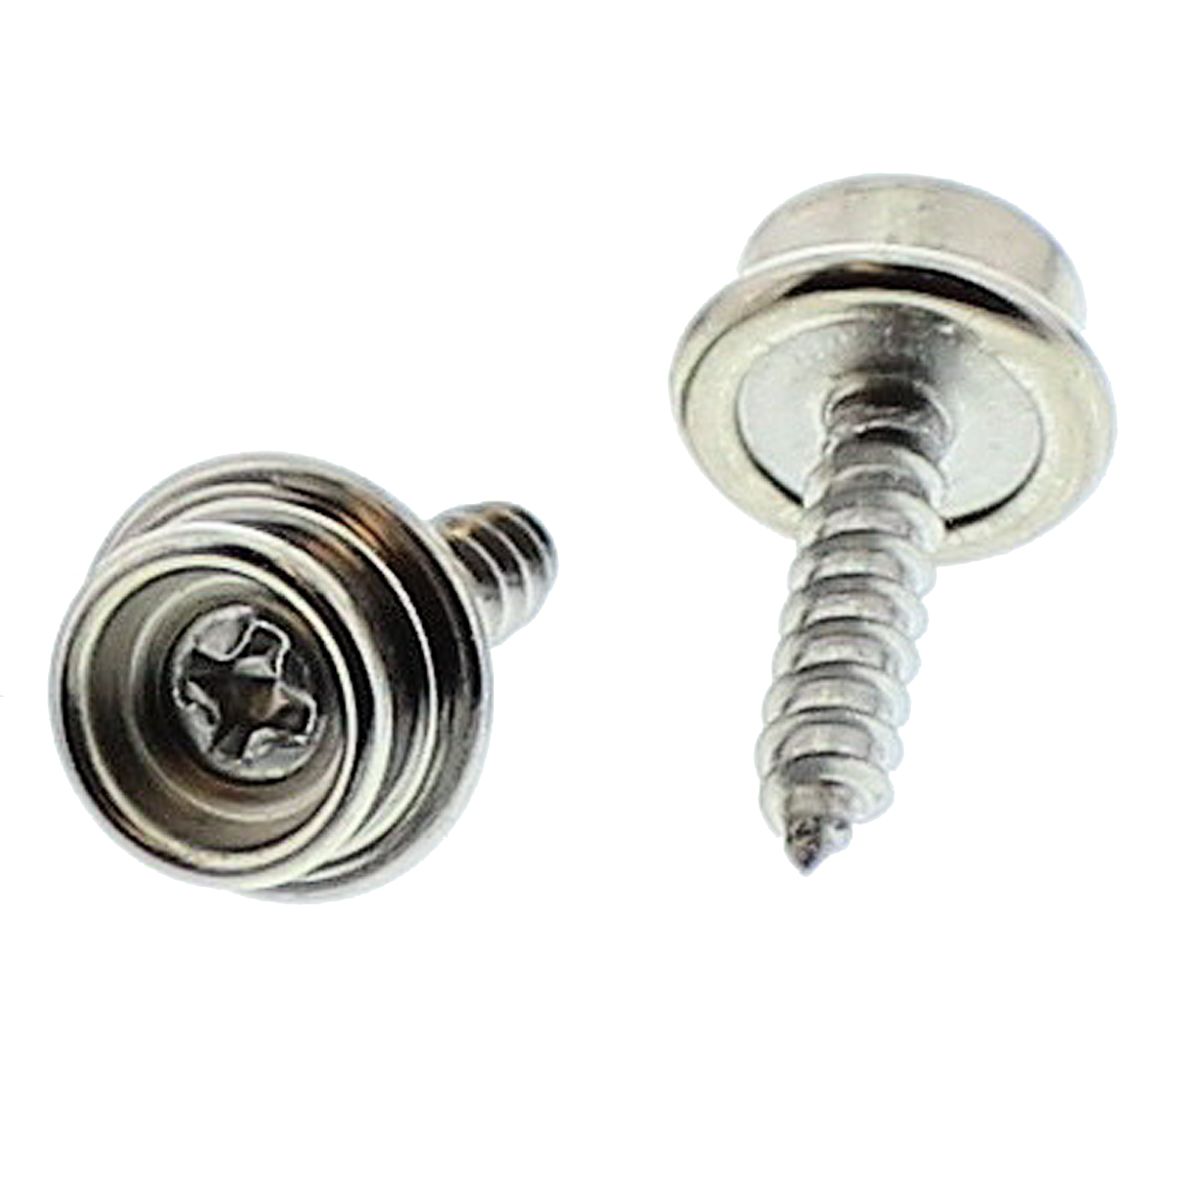 Tacoma Screw Products